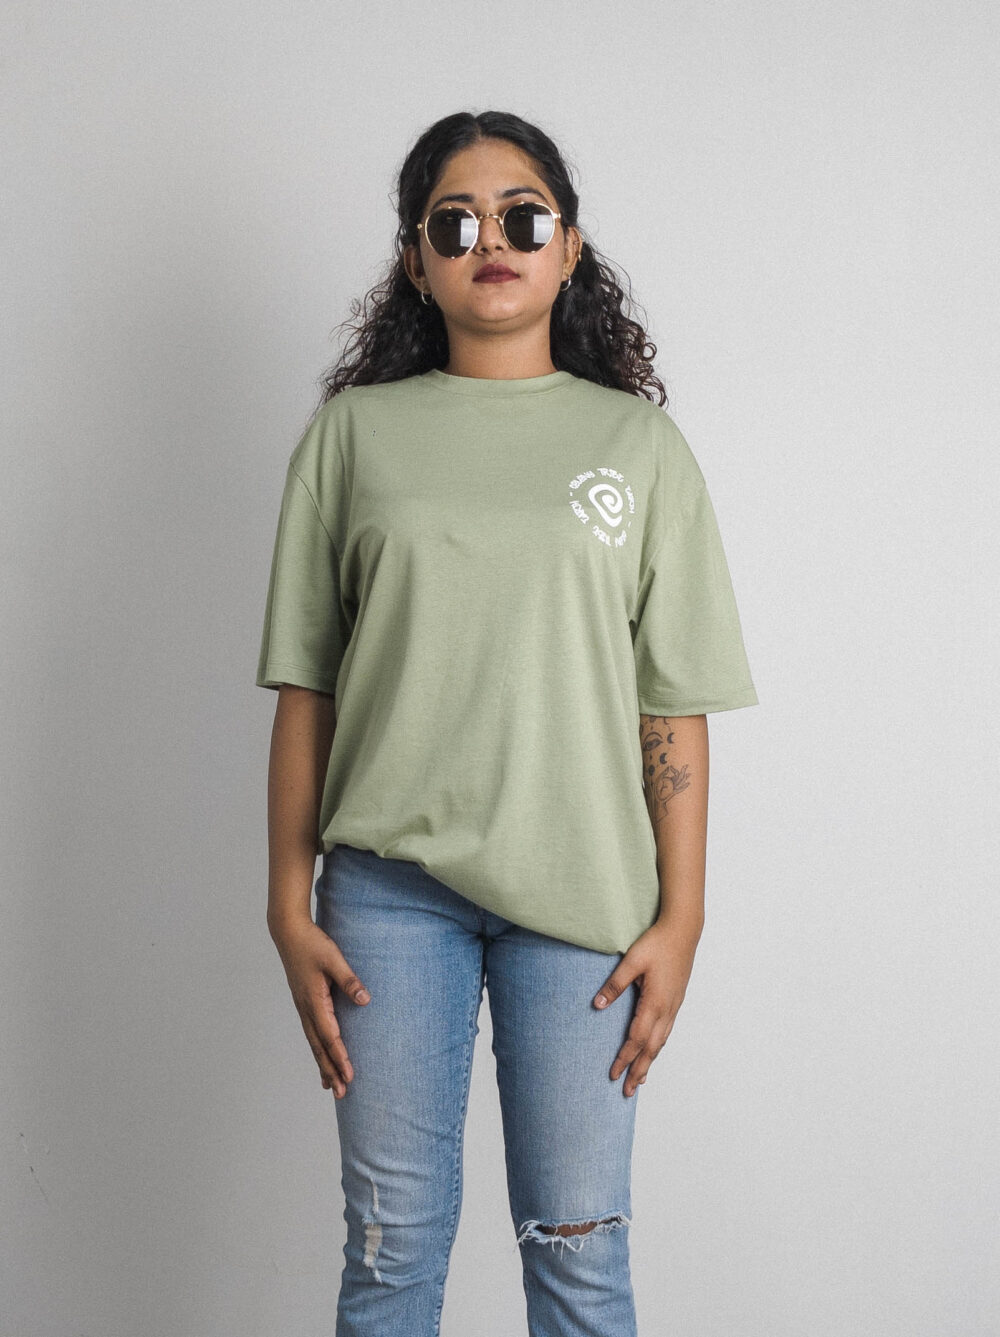 Oversized Graphic Tee Down To Earth Moss Green